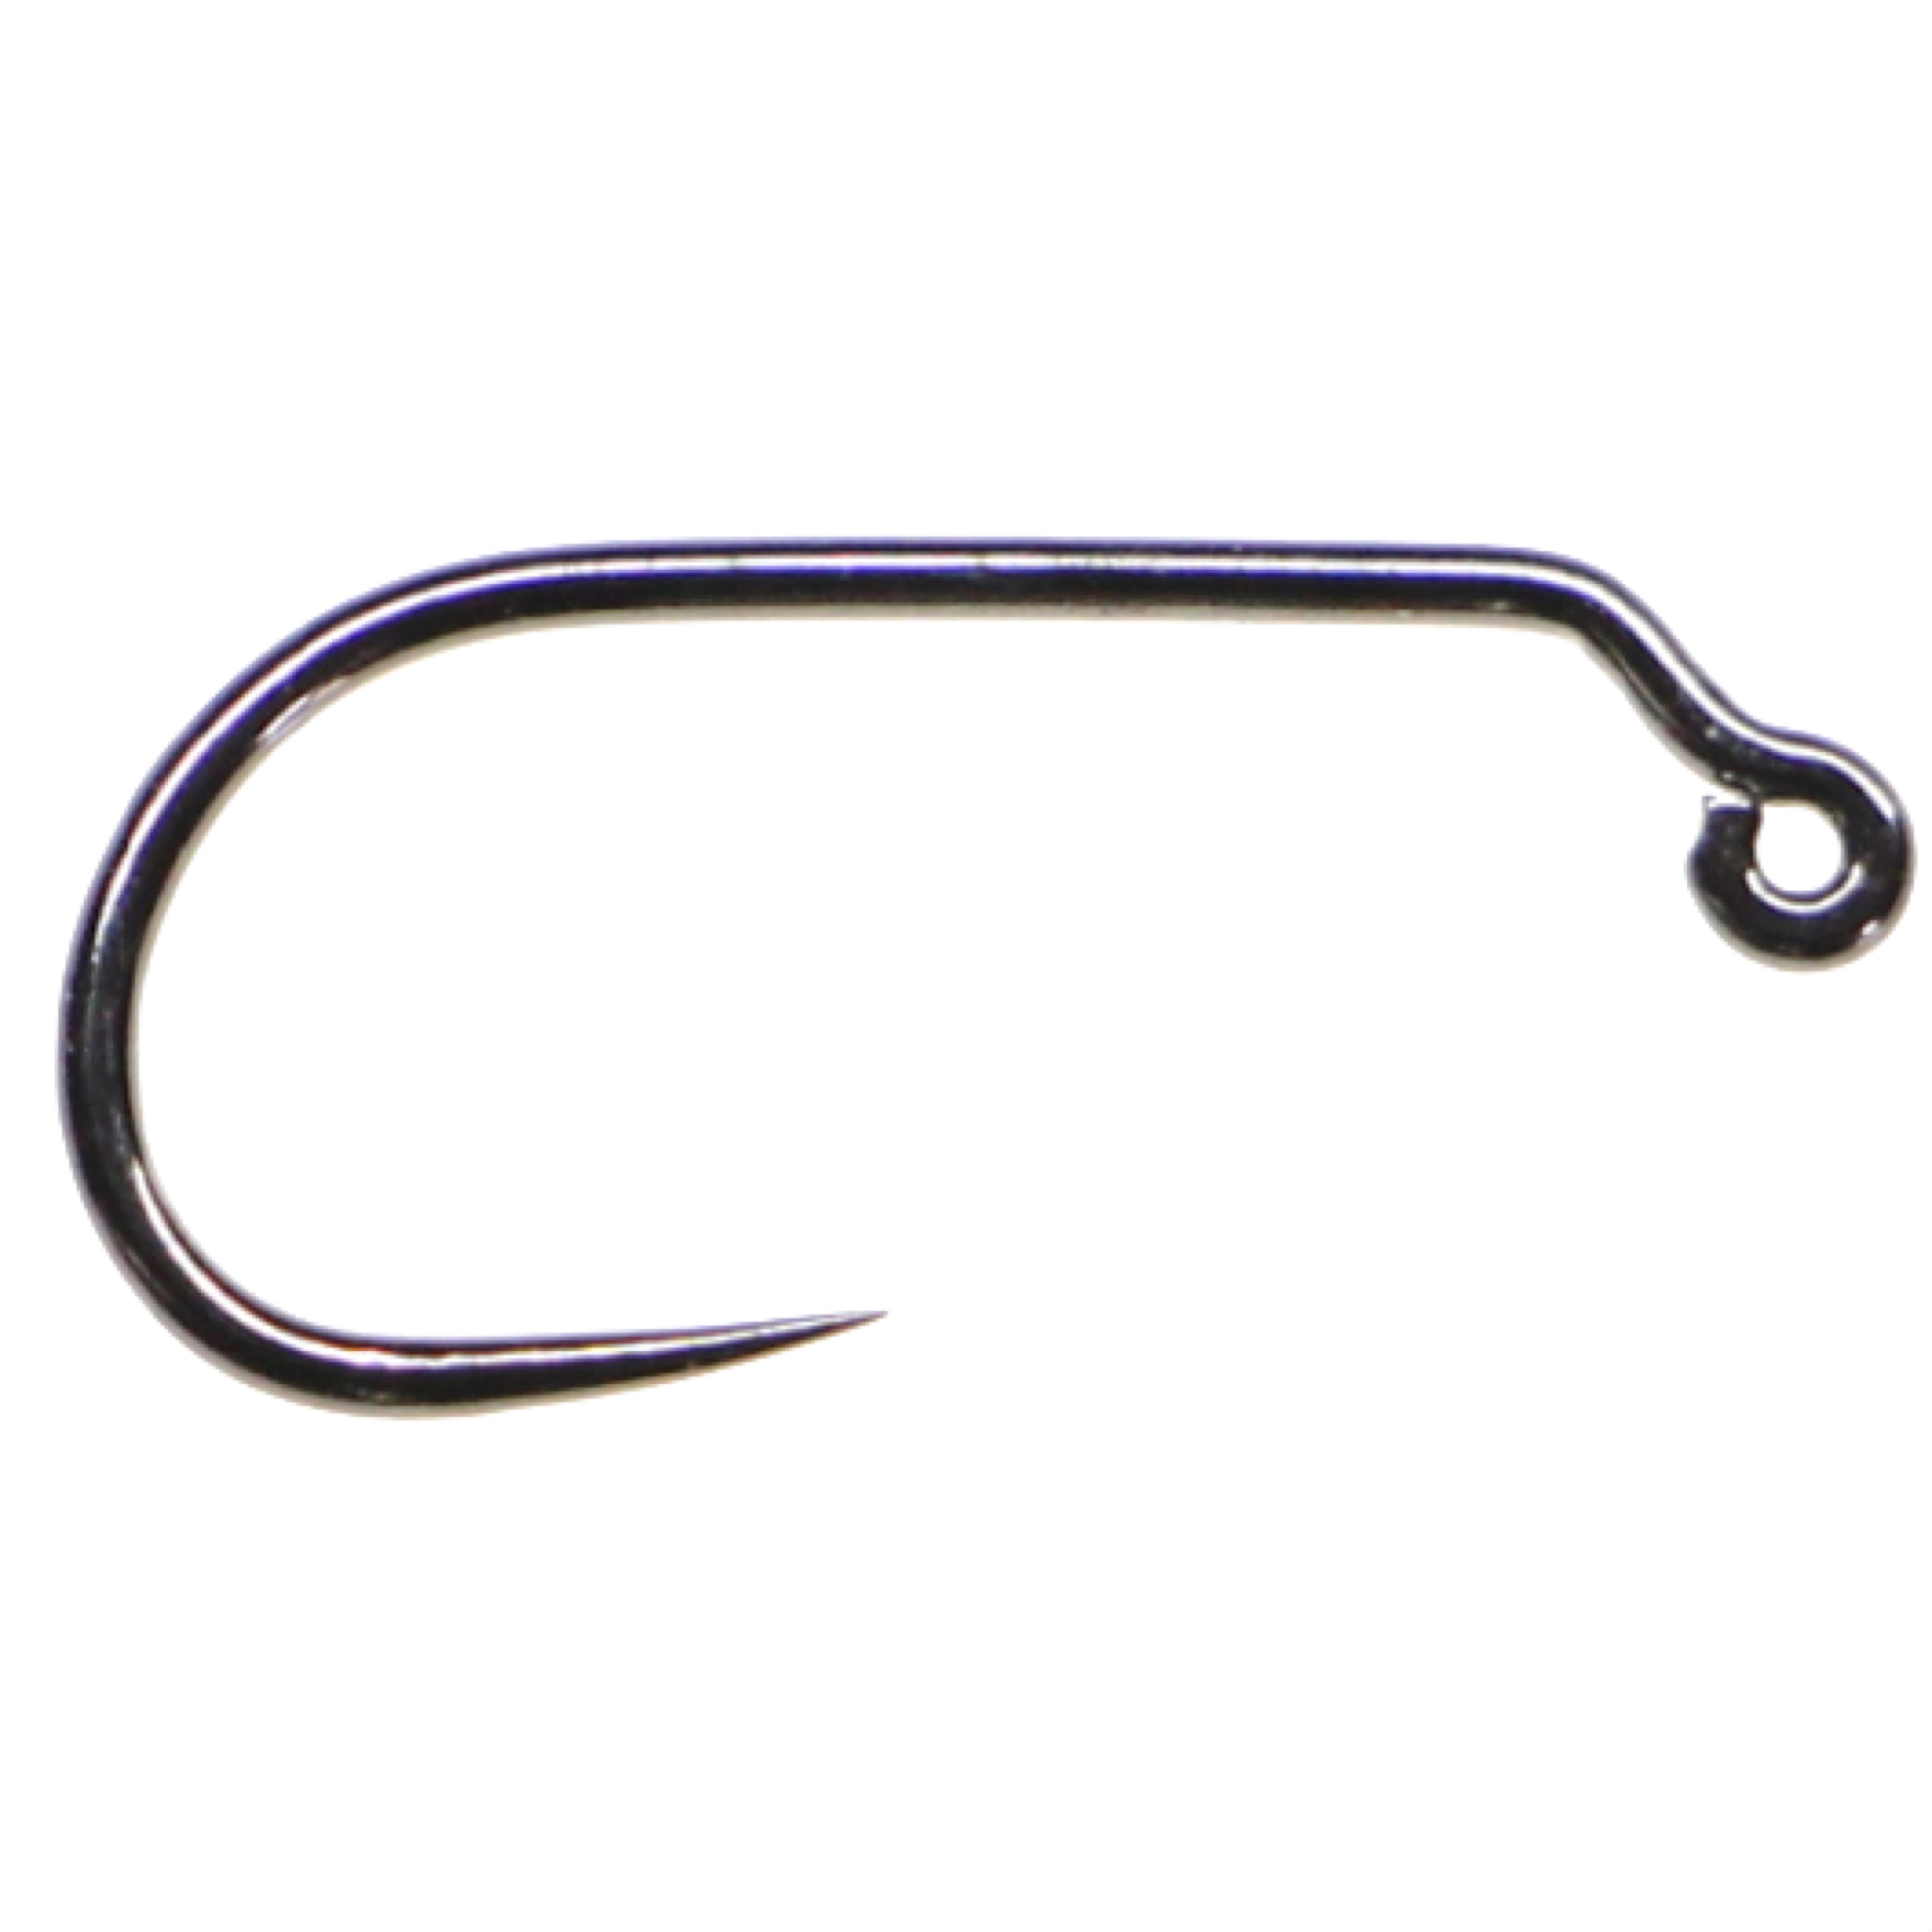 Barbless Hooks: Why Use Barbless Hooks & How To Make Your Hooks Barbless 